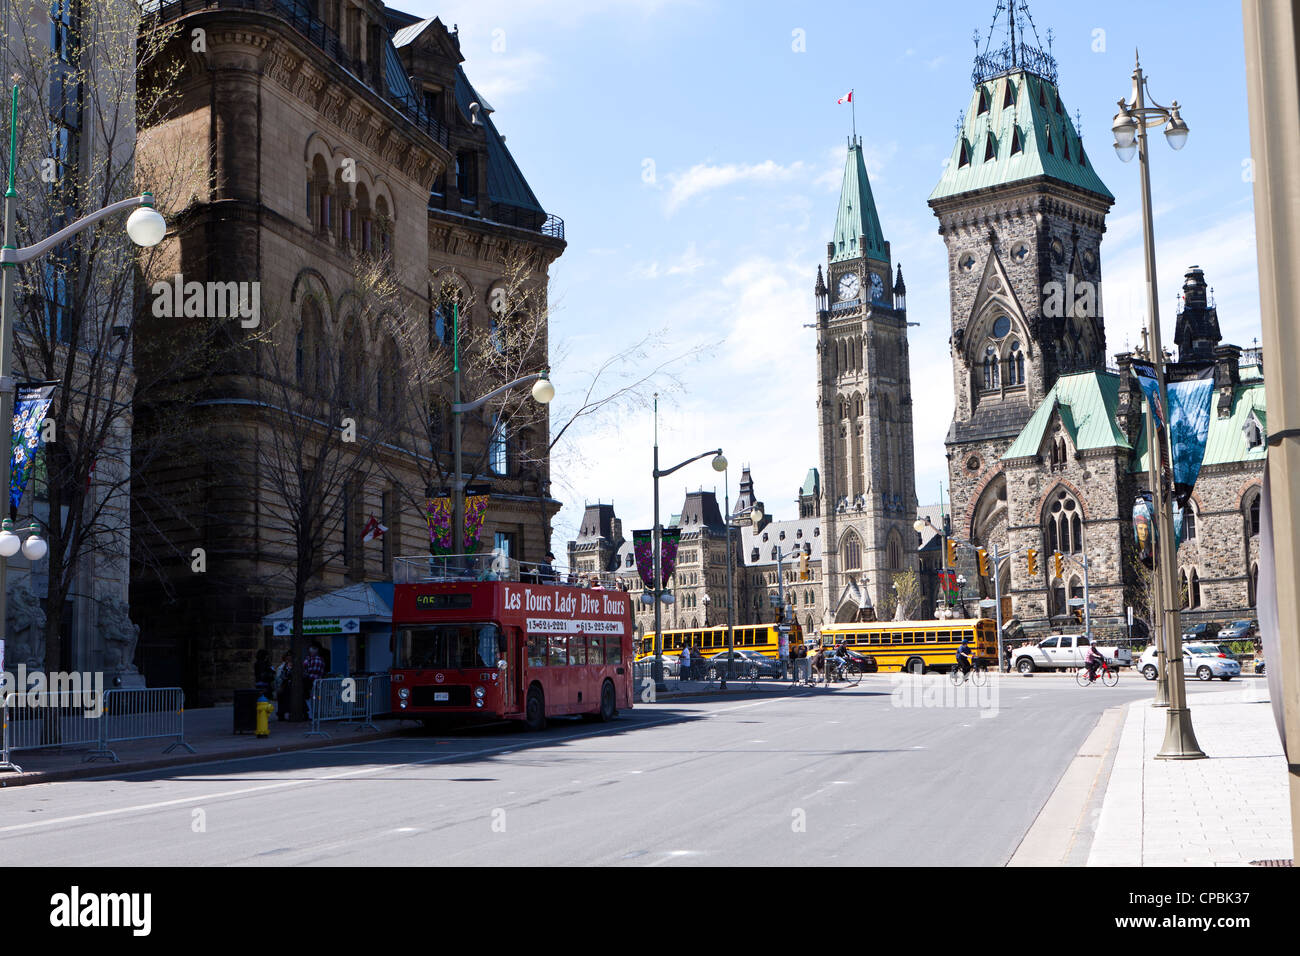 Ottawa downtown, red double-decker bus in front of Parliament Hill Stock Photo